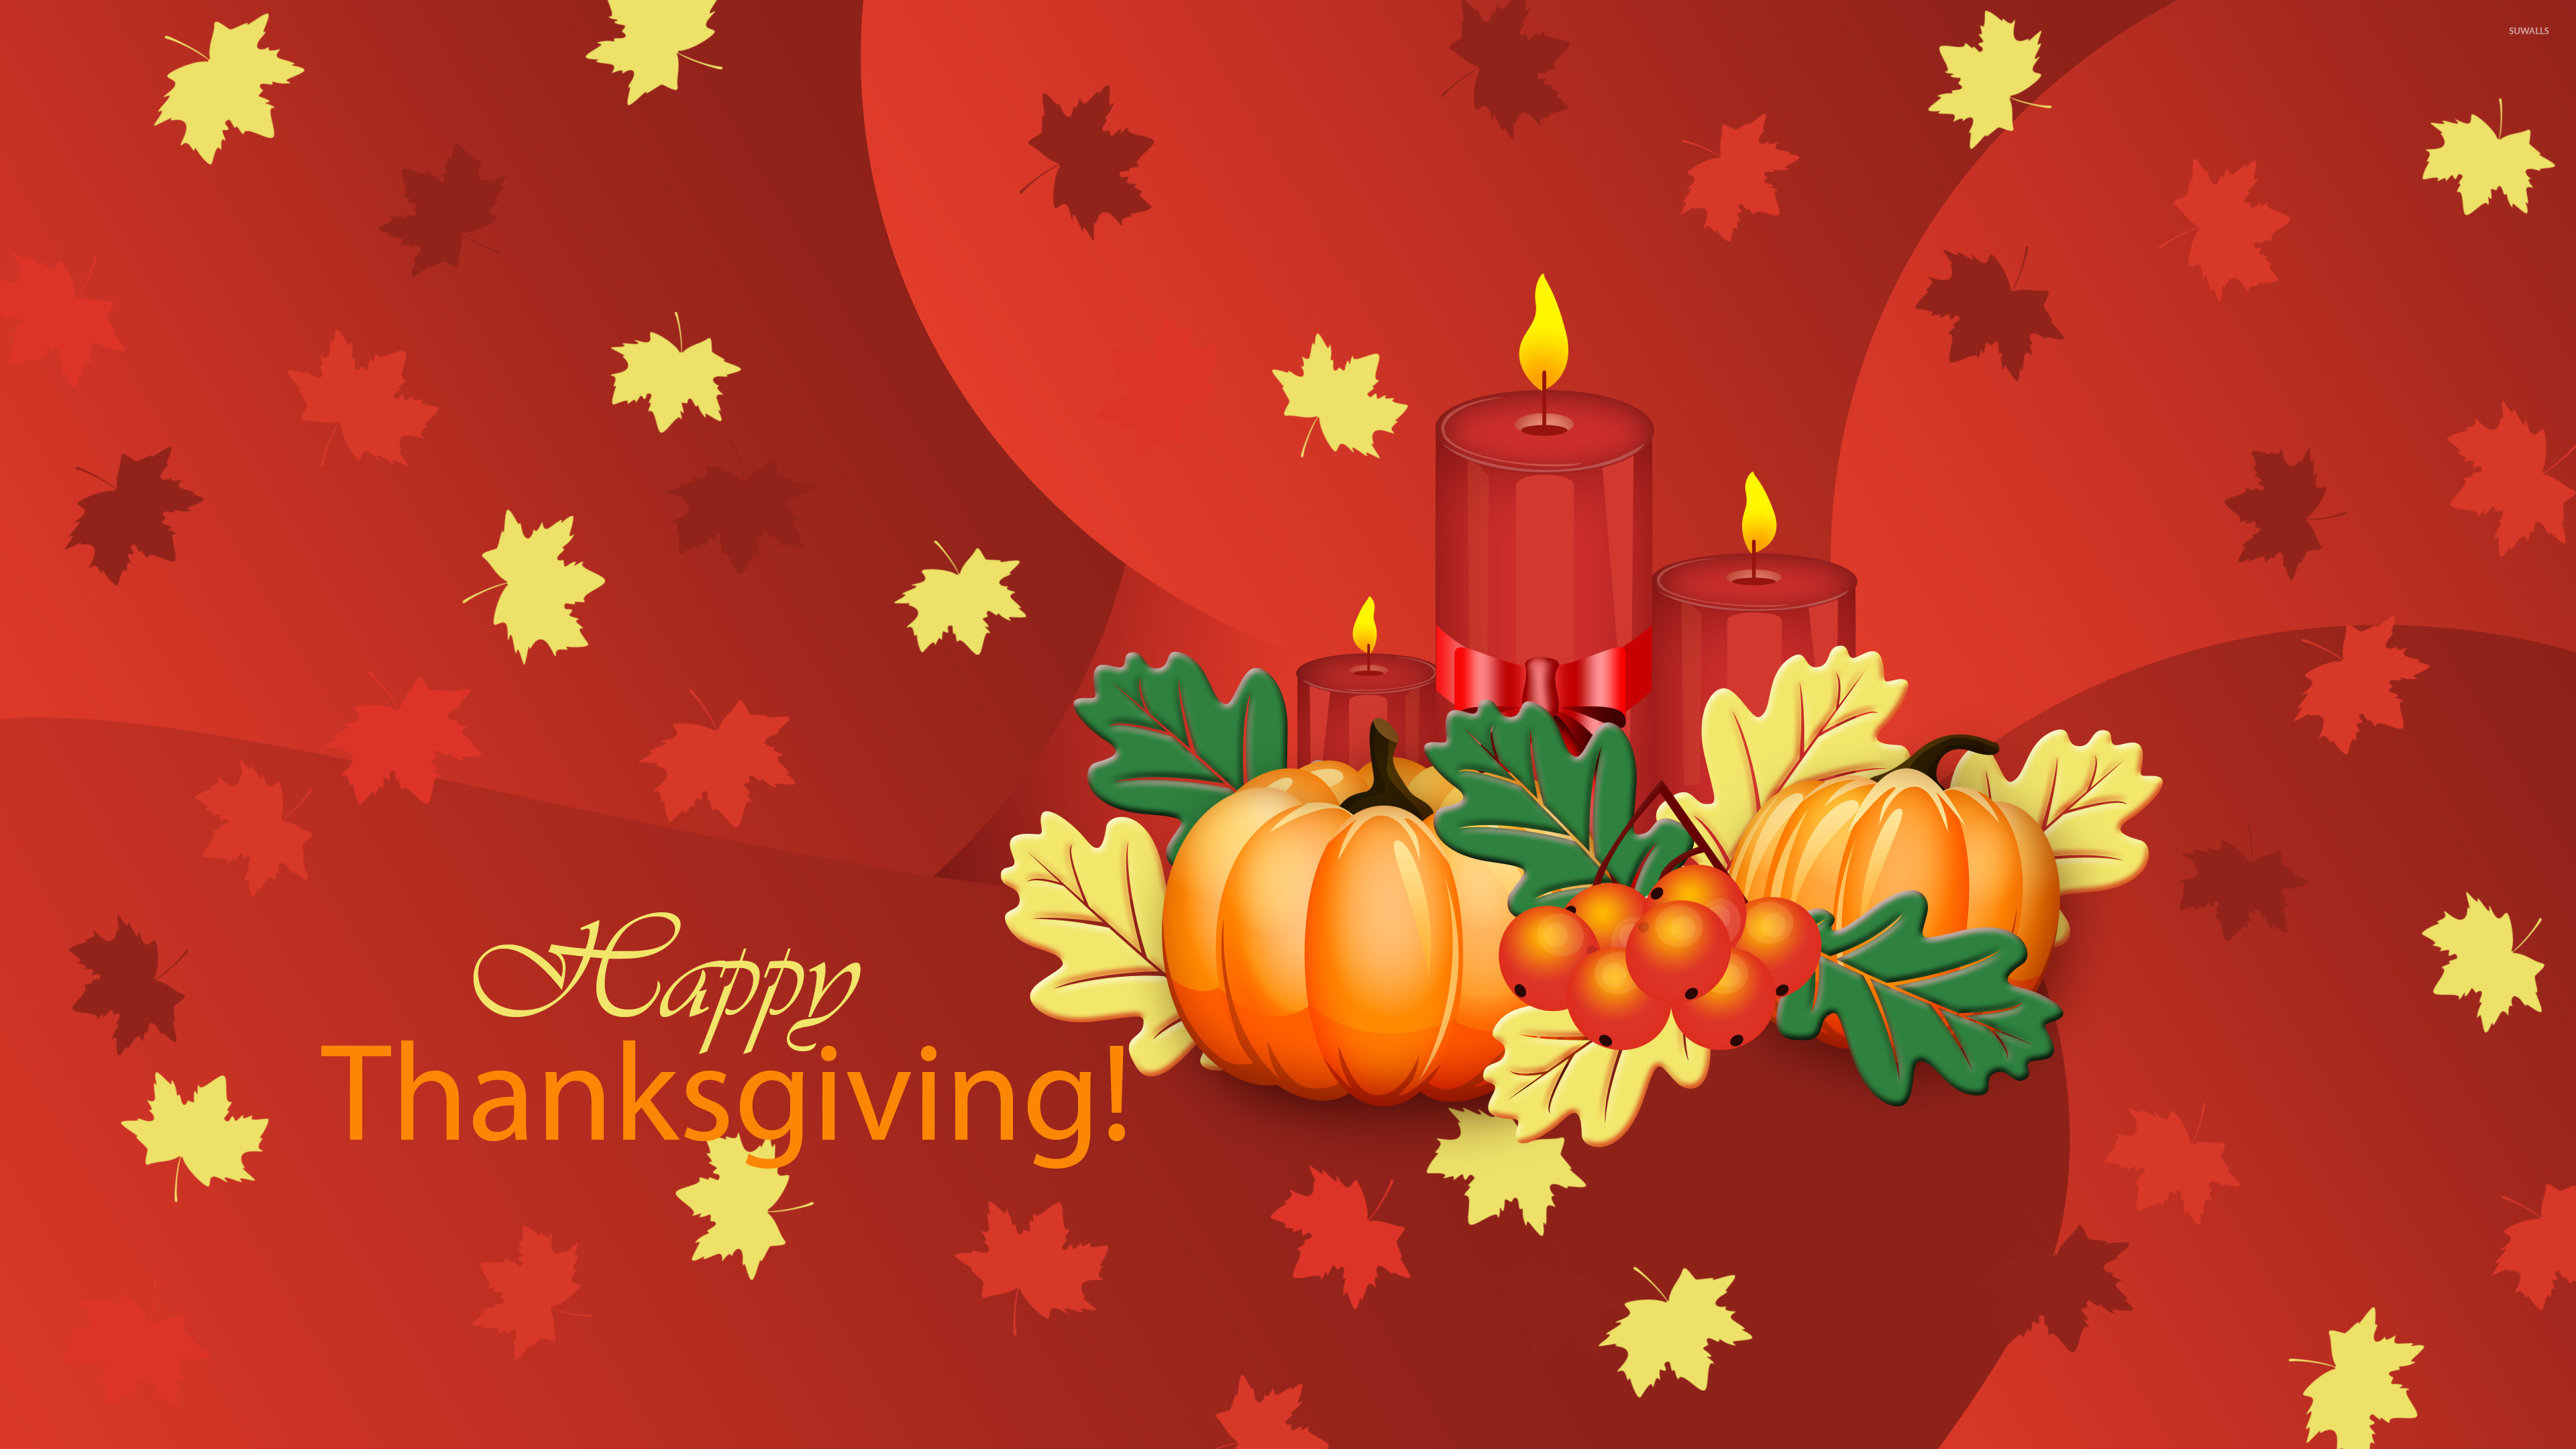 Cute Thanksgiving Backgrounds.